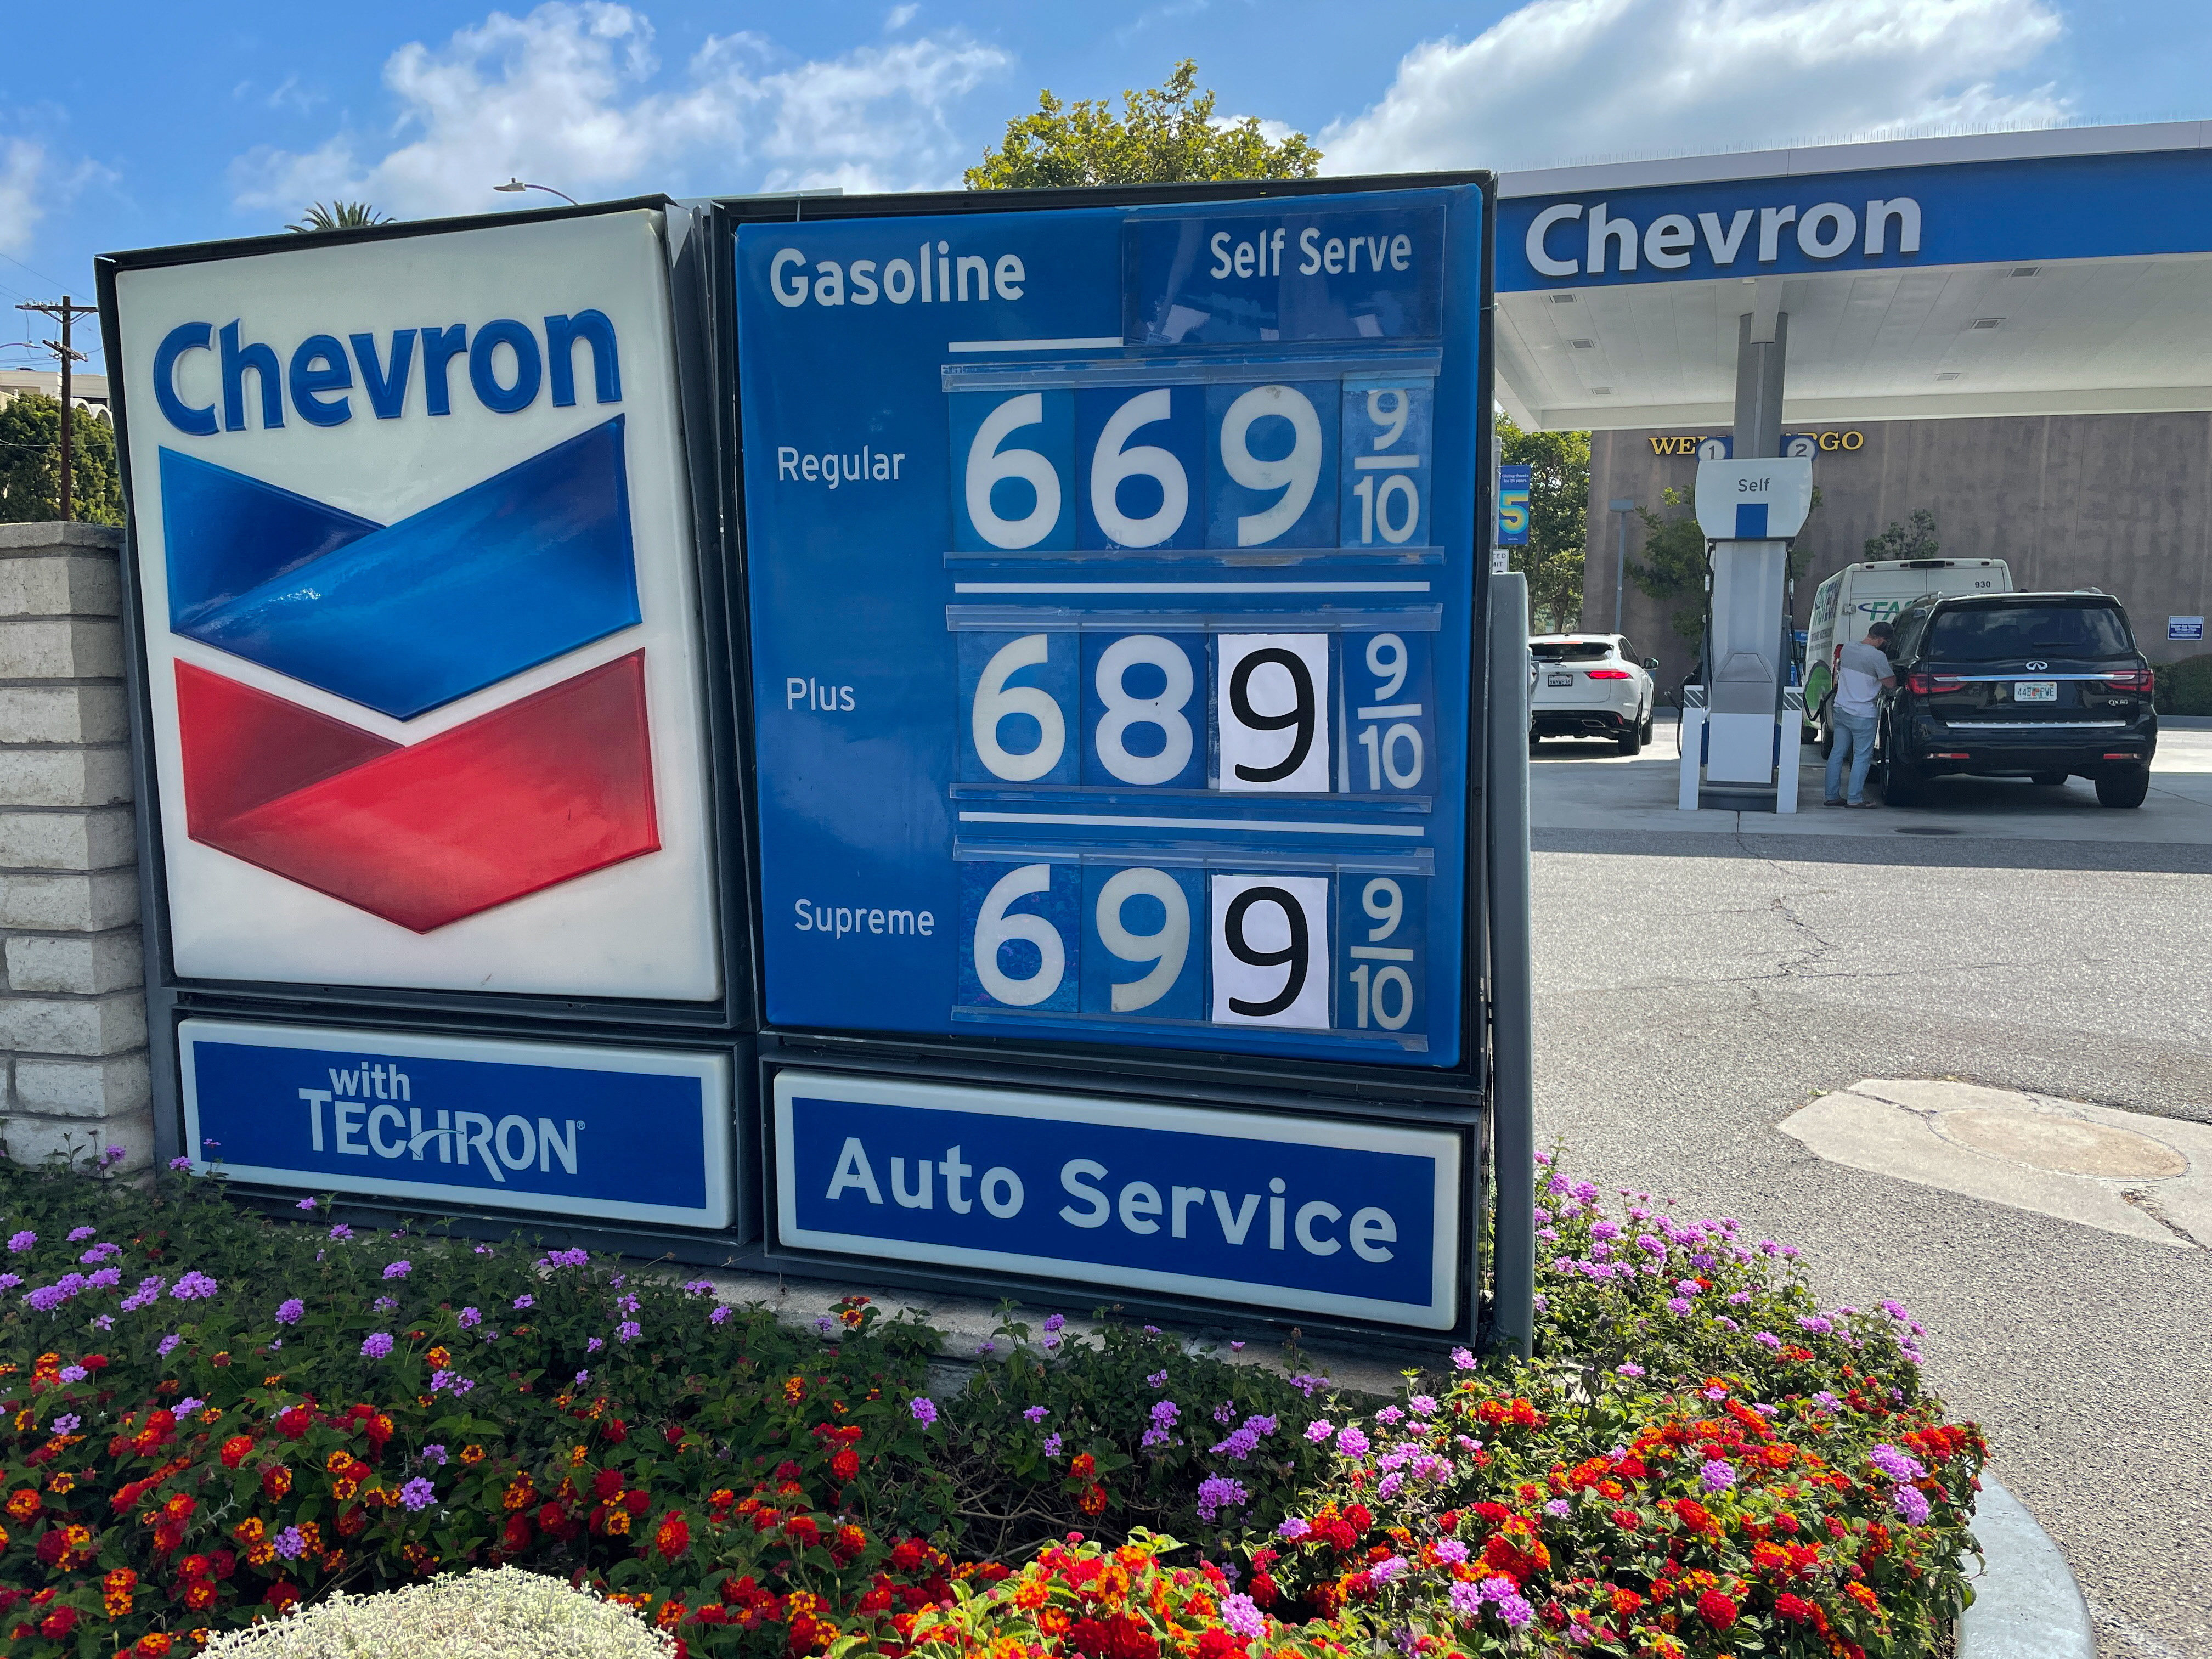 Gas prices are advertised at Chevron station in Los Angeles